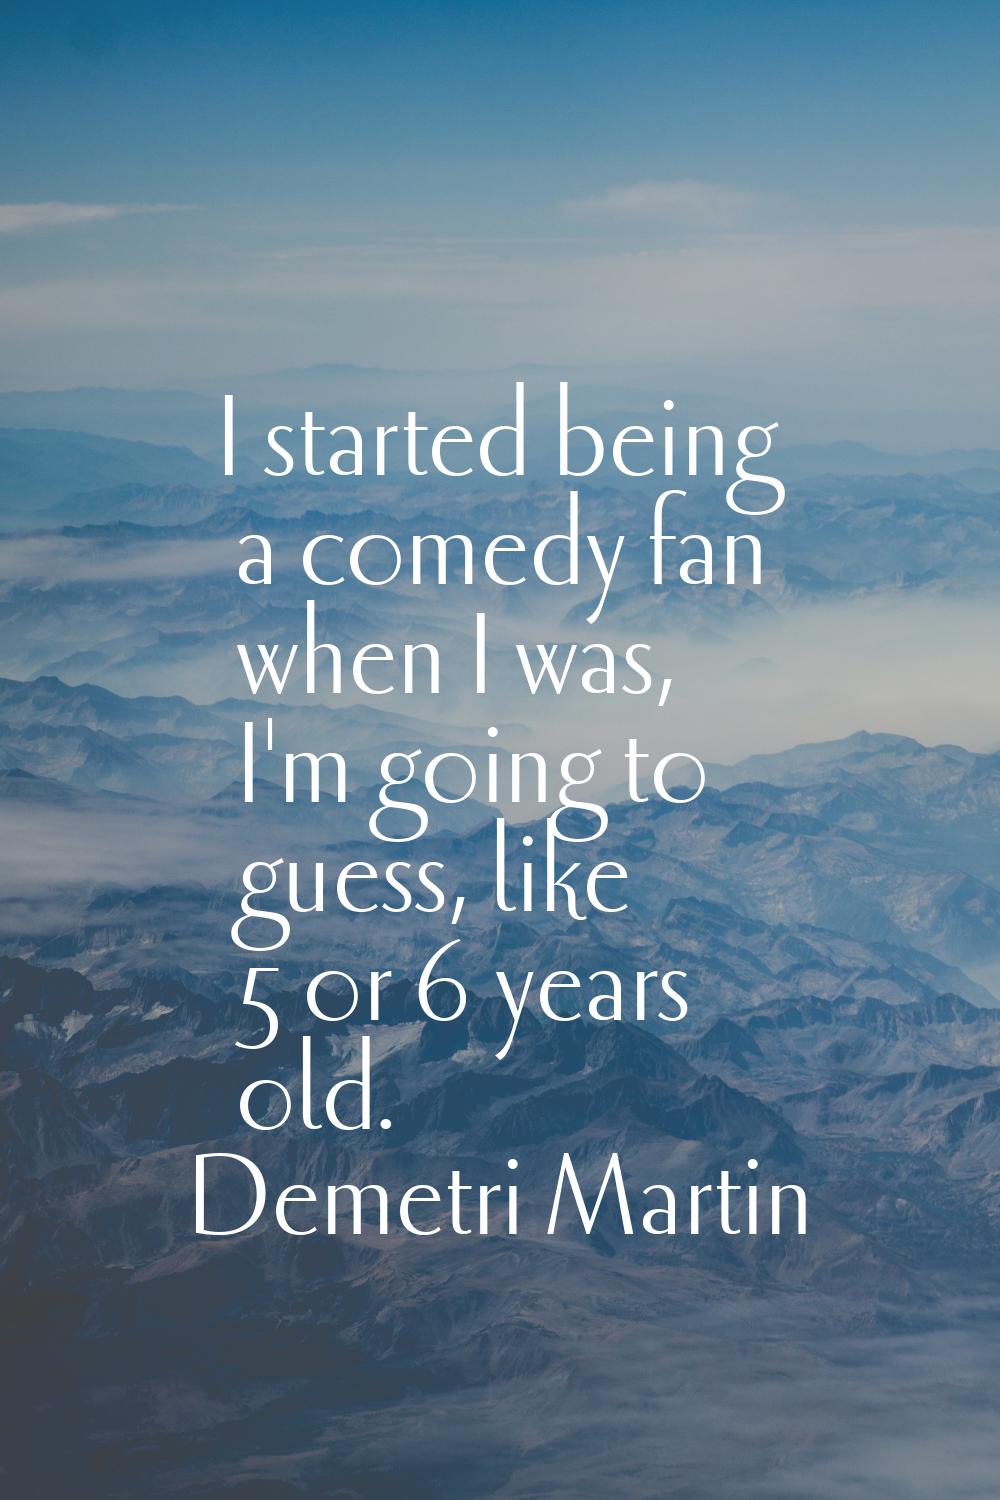 I started being a comedy fan when I was, I'm going to guess, like 5 or 6 years old.